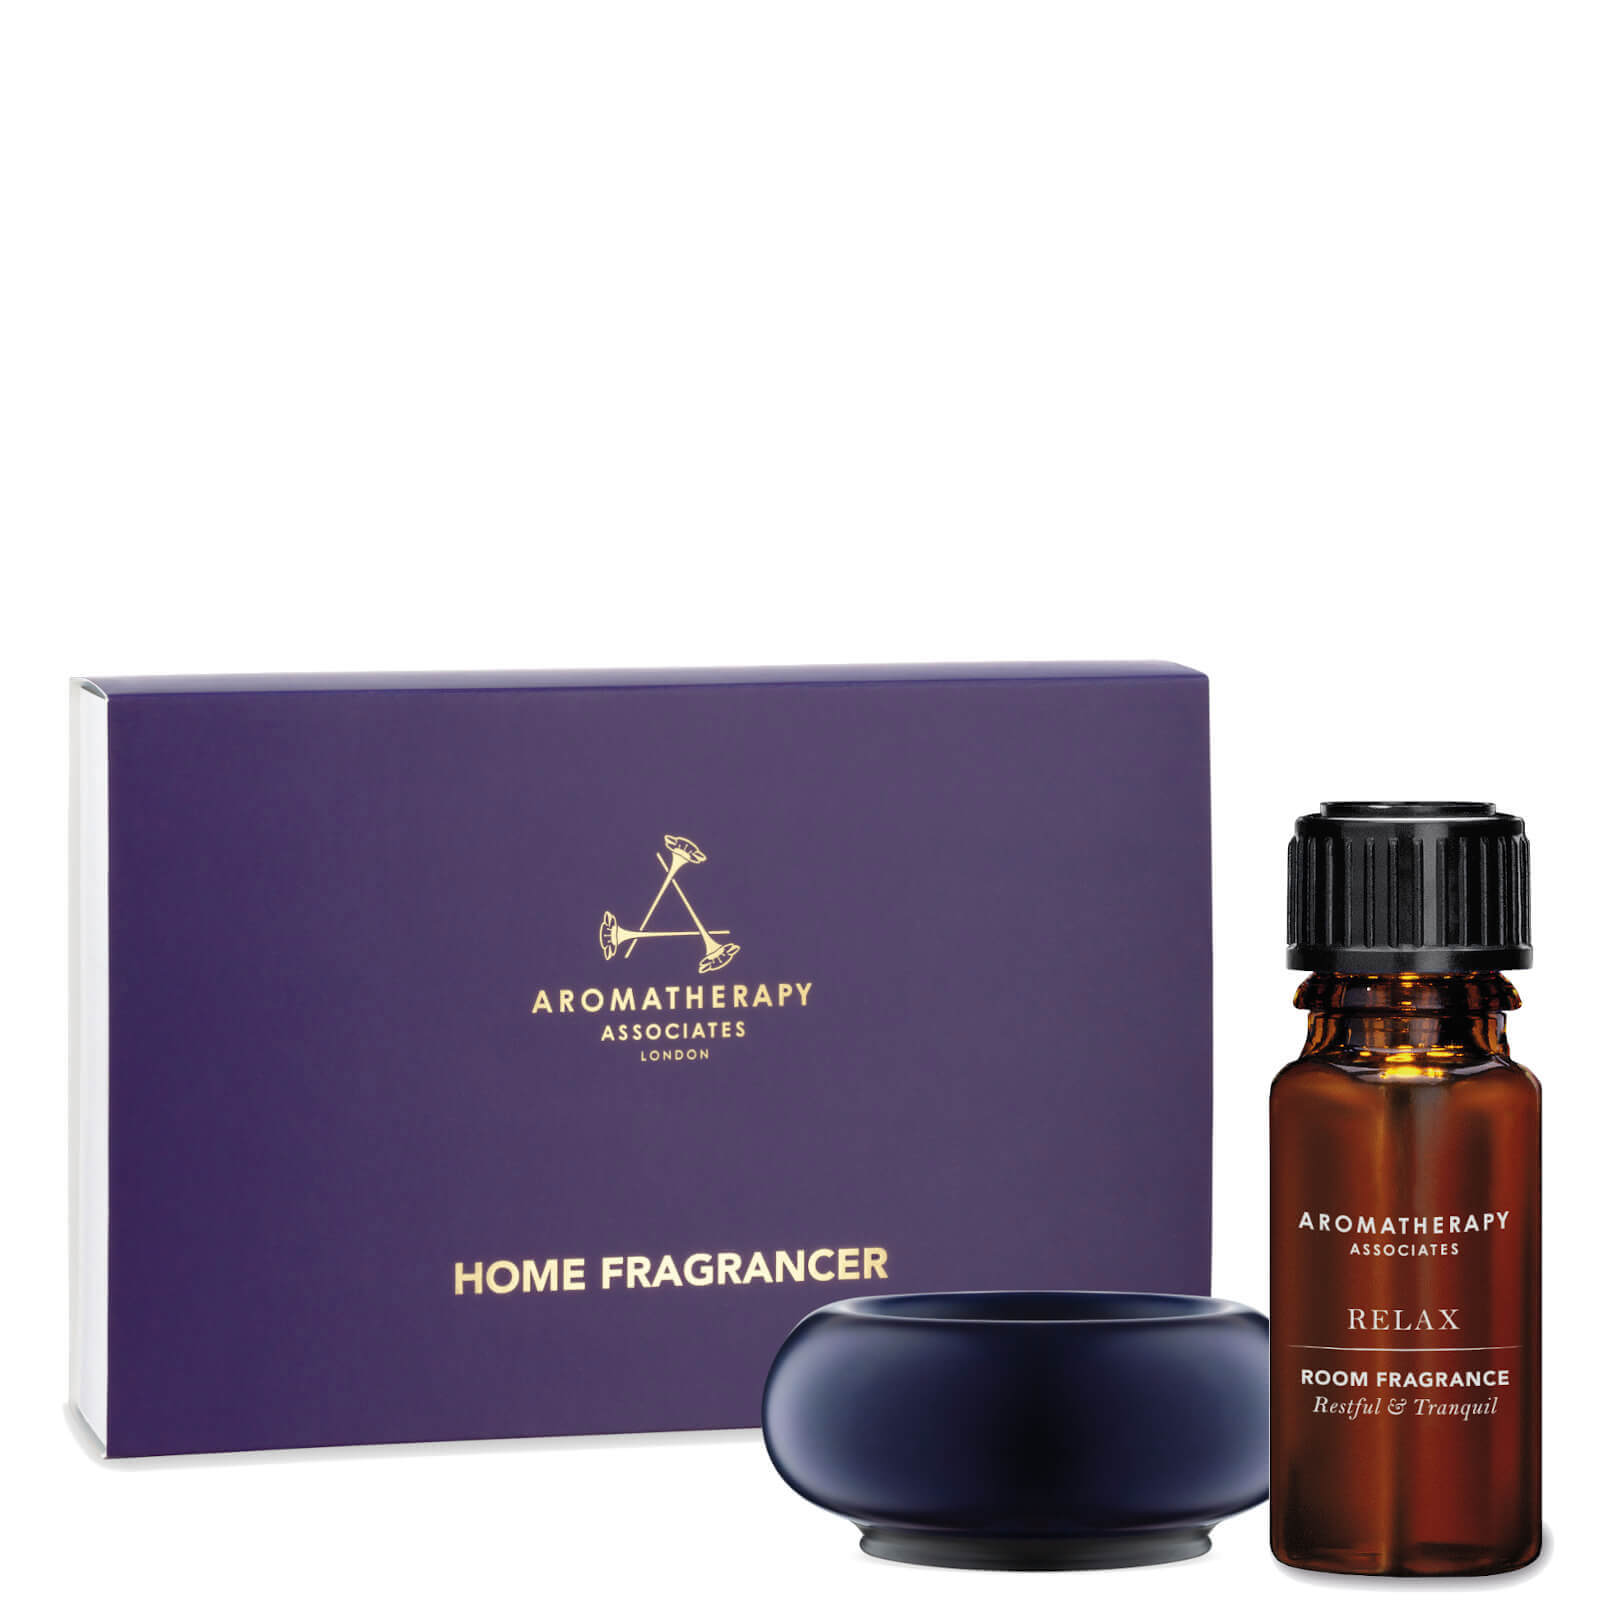 Aromatherapy Associates Relaxing Fragrancer Collection lookfantastic.com imagine